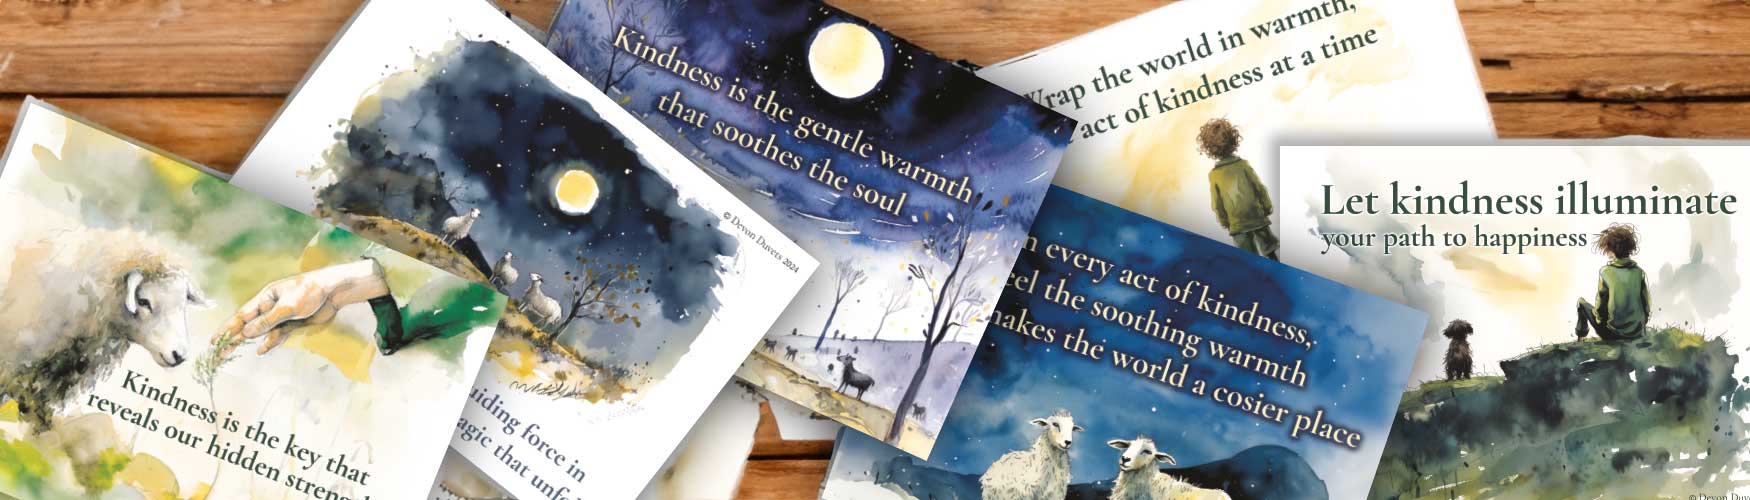 Graceful postcards from Devon Duvets, embellished with heartening kindness phrases, set to journey and spread cheer and warmth.